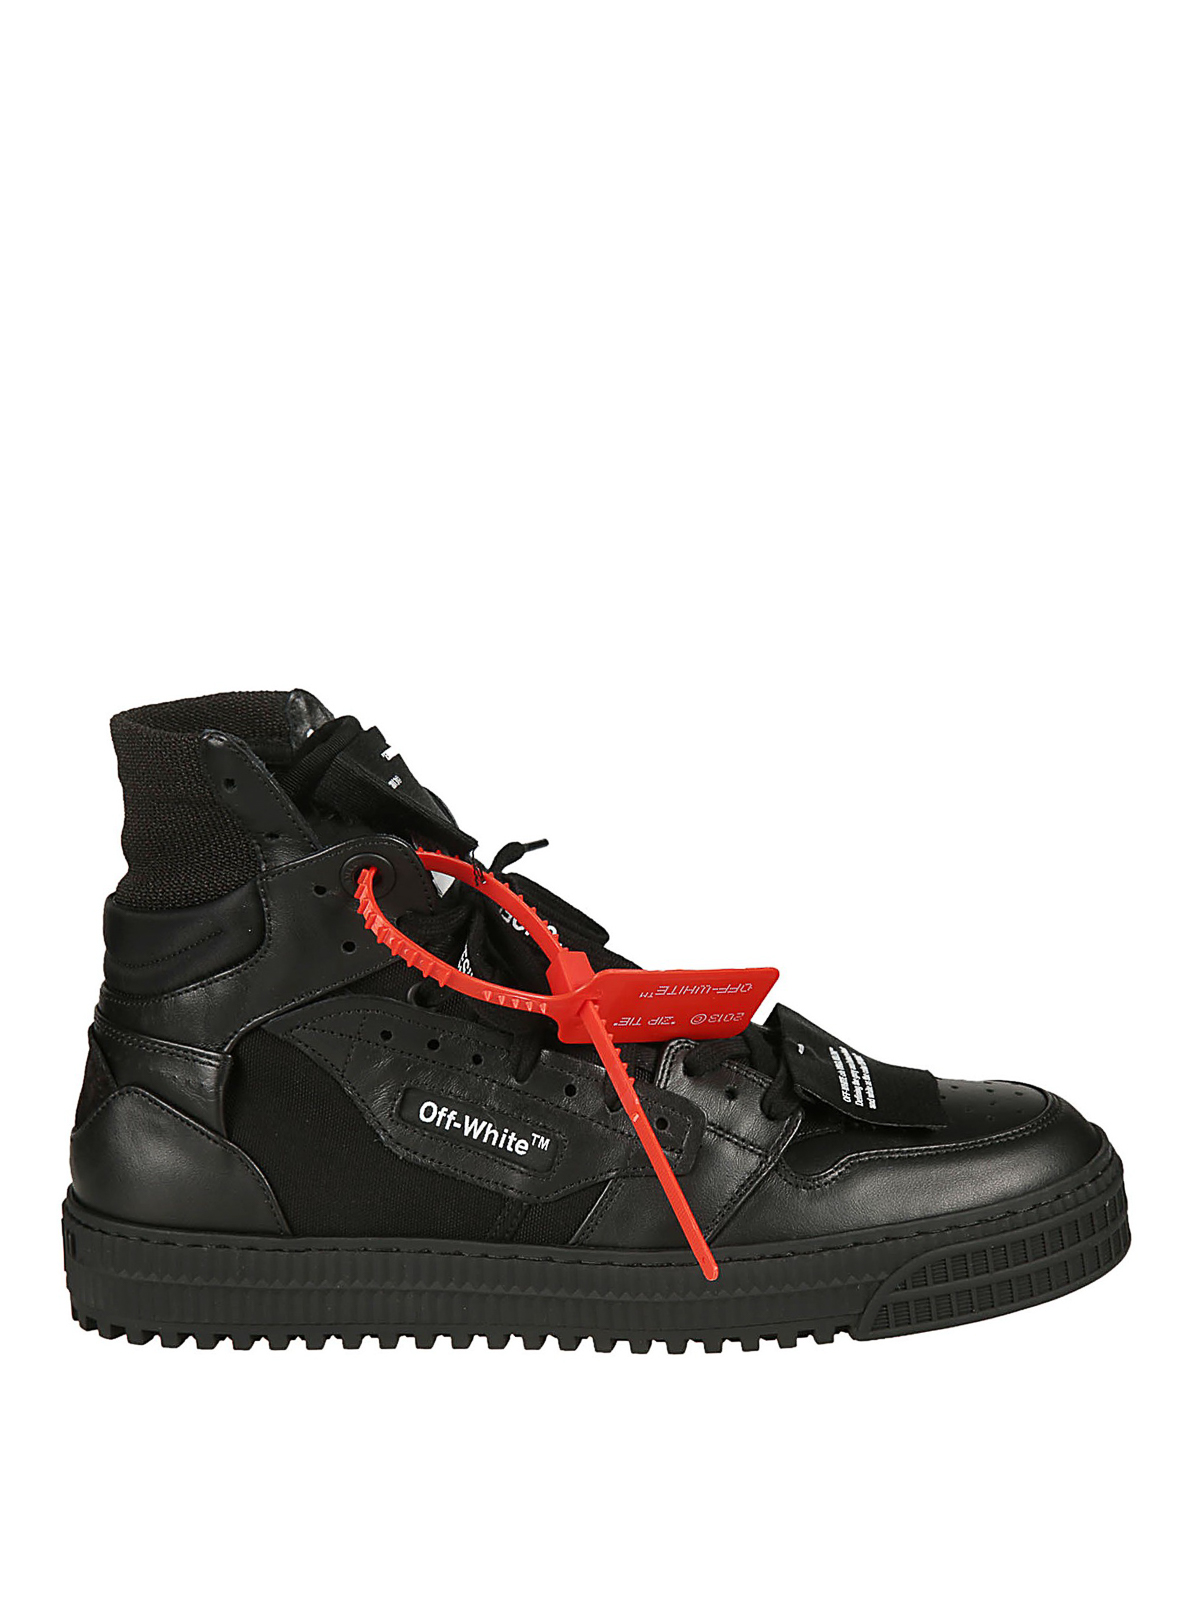 off white black high top sneakers